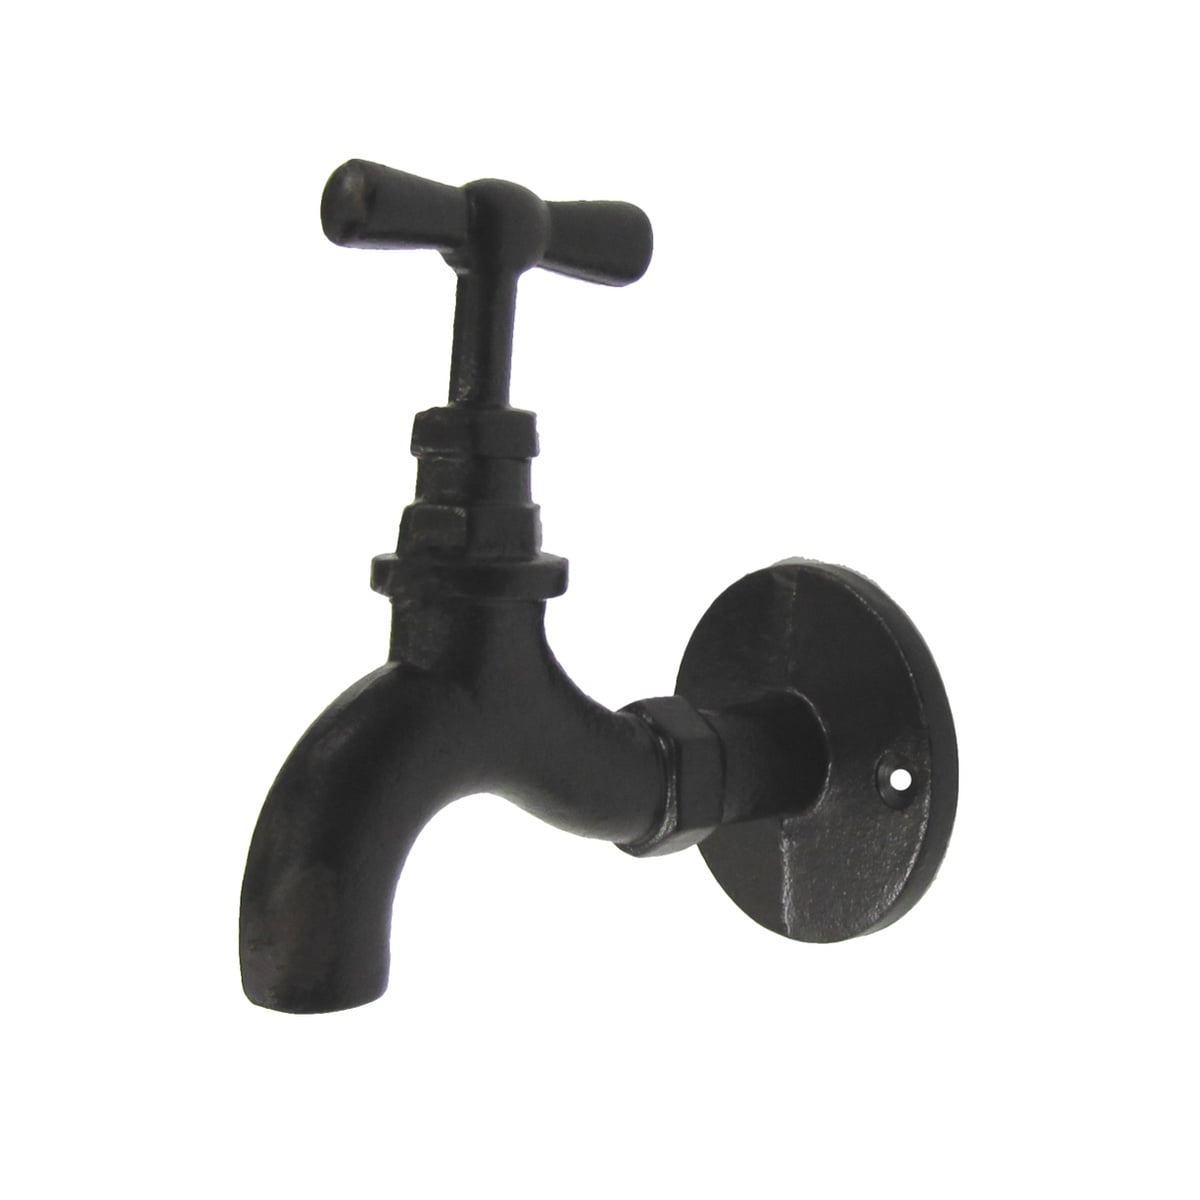 Faucet Towel Ring Hanger Rustic Cast Iron Antique Style Wall Mounted Spigot